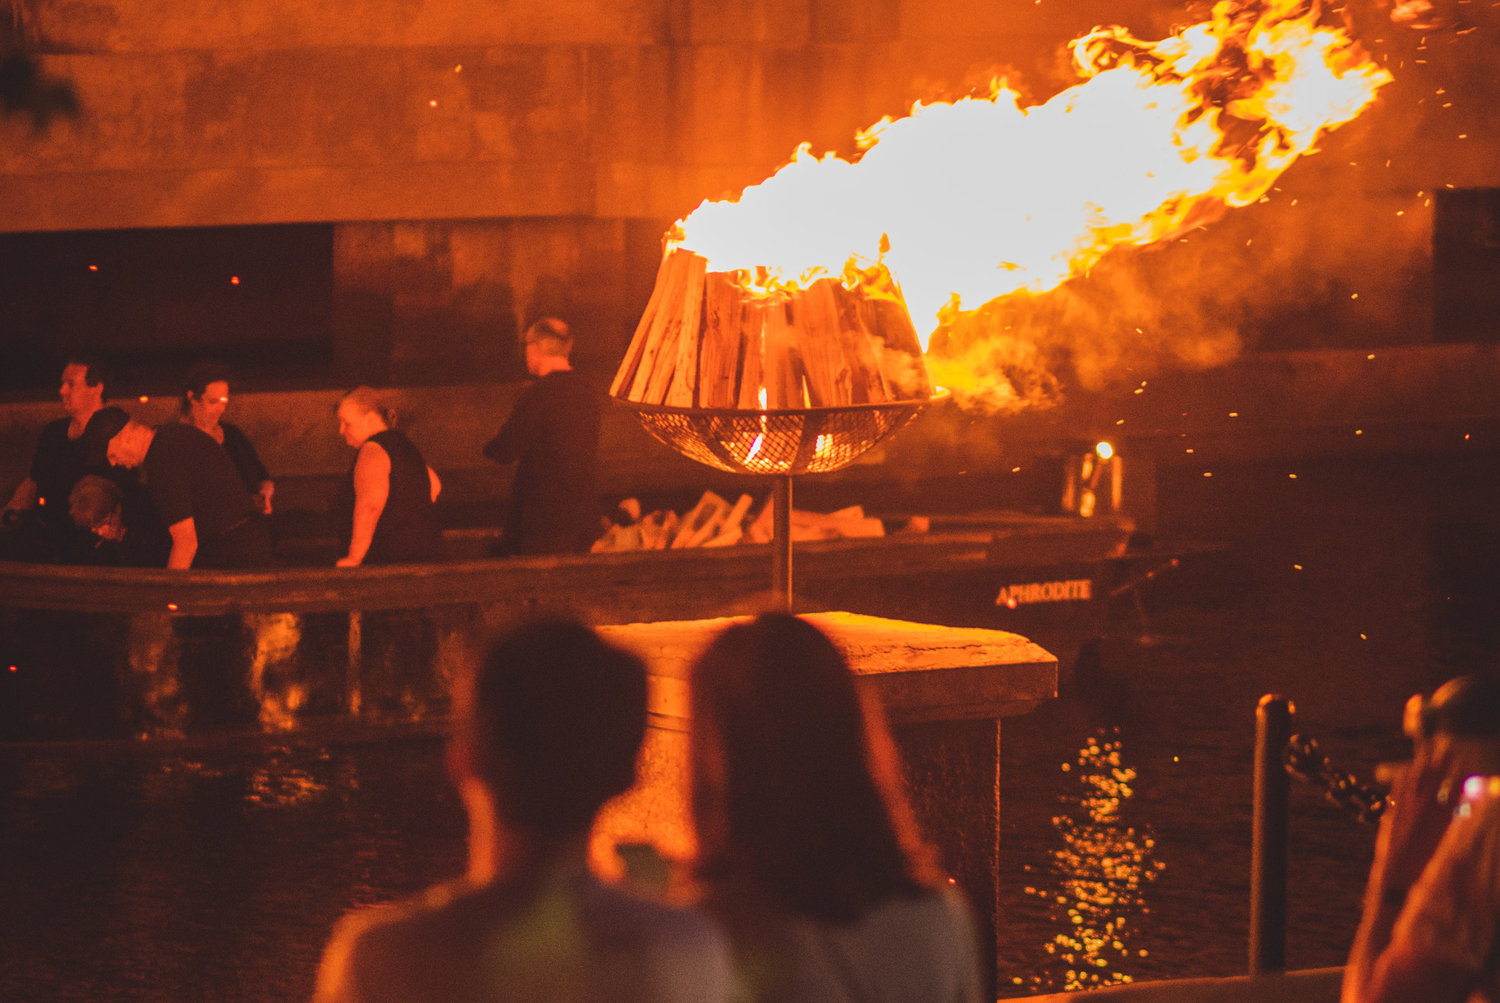 For over 20 years, WaterFire has been dazzling visitors, centered around the spectacle of burning braziers along the river